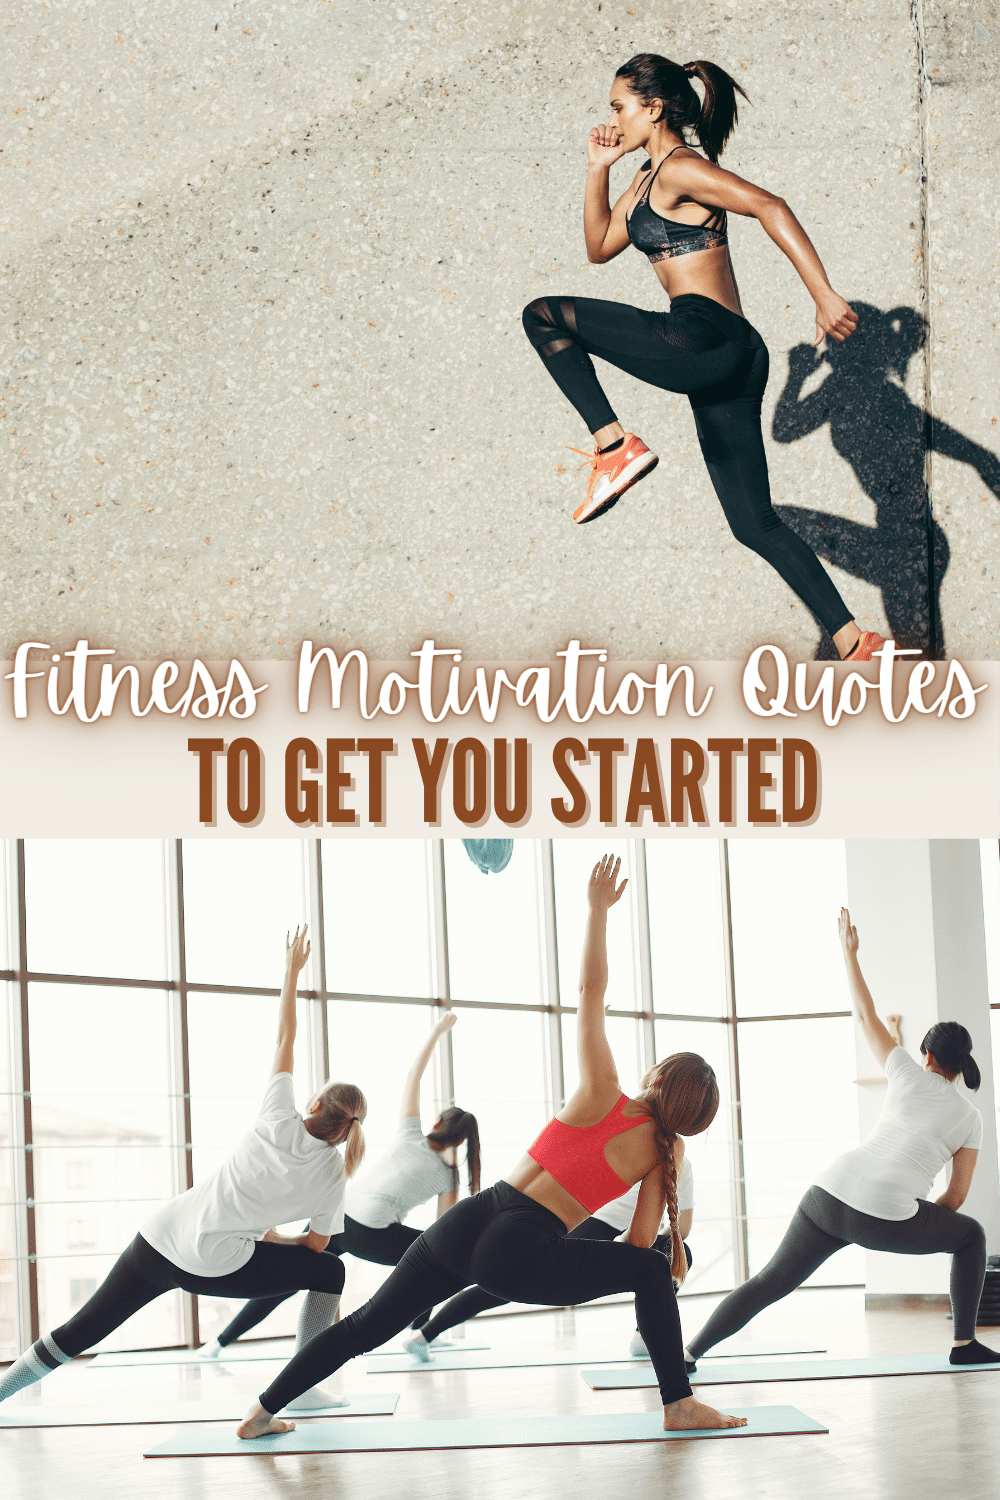 The hardest part of working out is getting started. Here's a collection of fitness motivation quotes to help inspire you to move each day. #fitness #exercise #workout #fitnessquotes #exercisequotes via @wondermomwannab